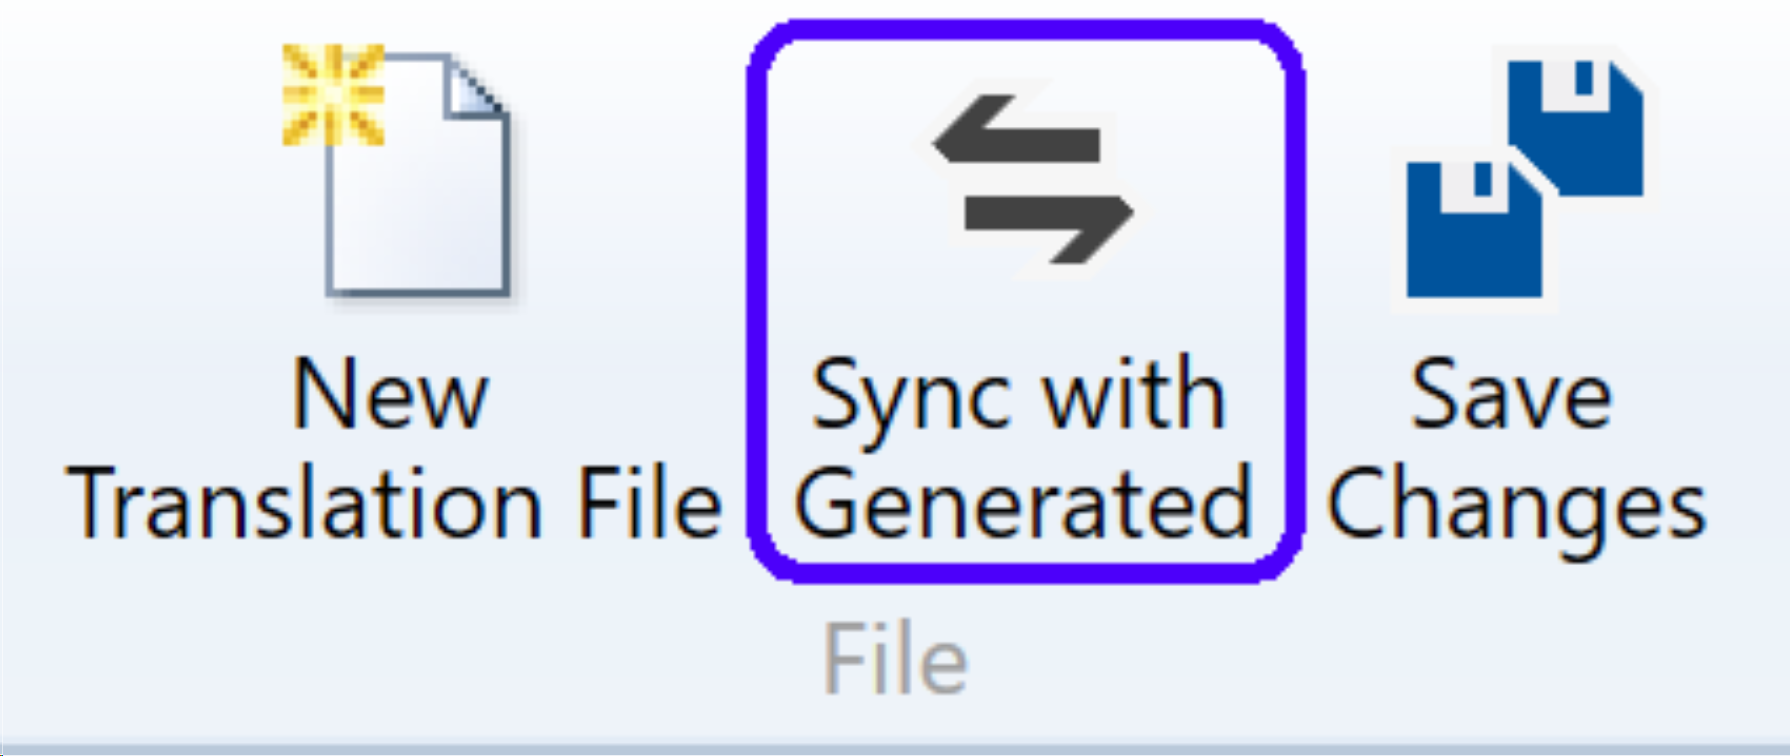 Translate Sync with Generated